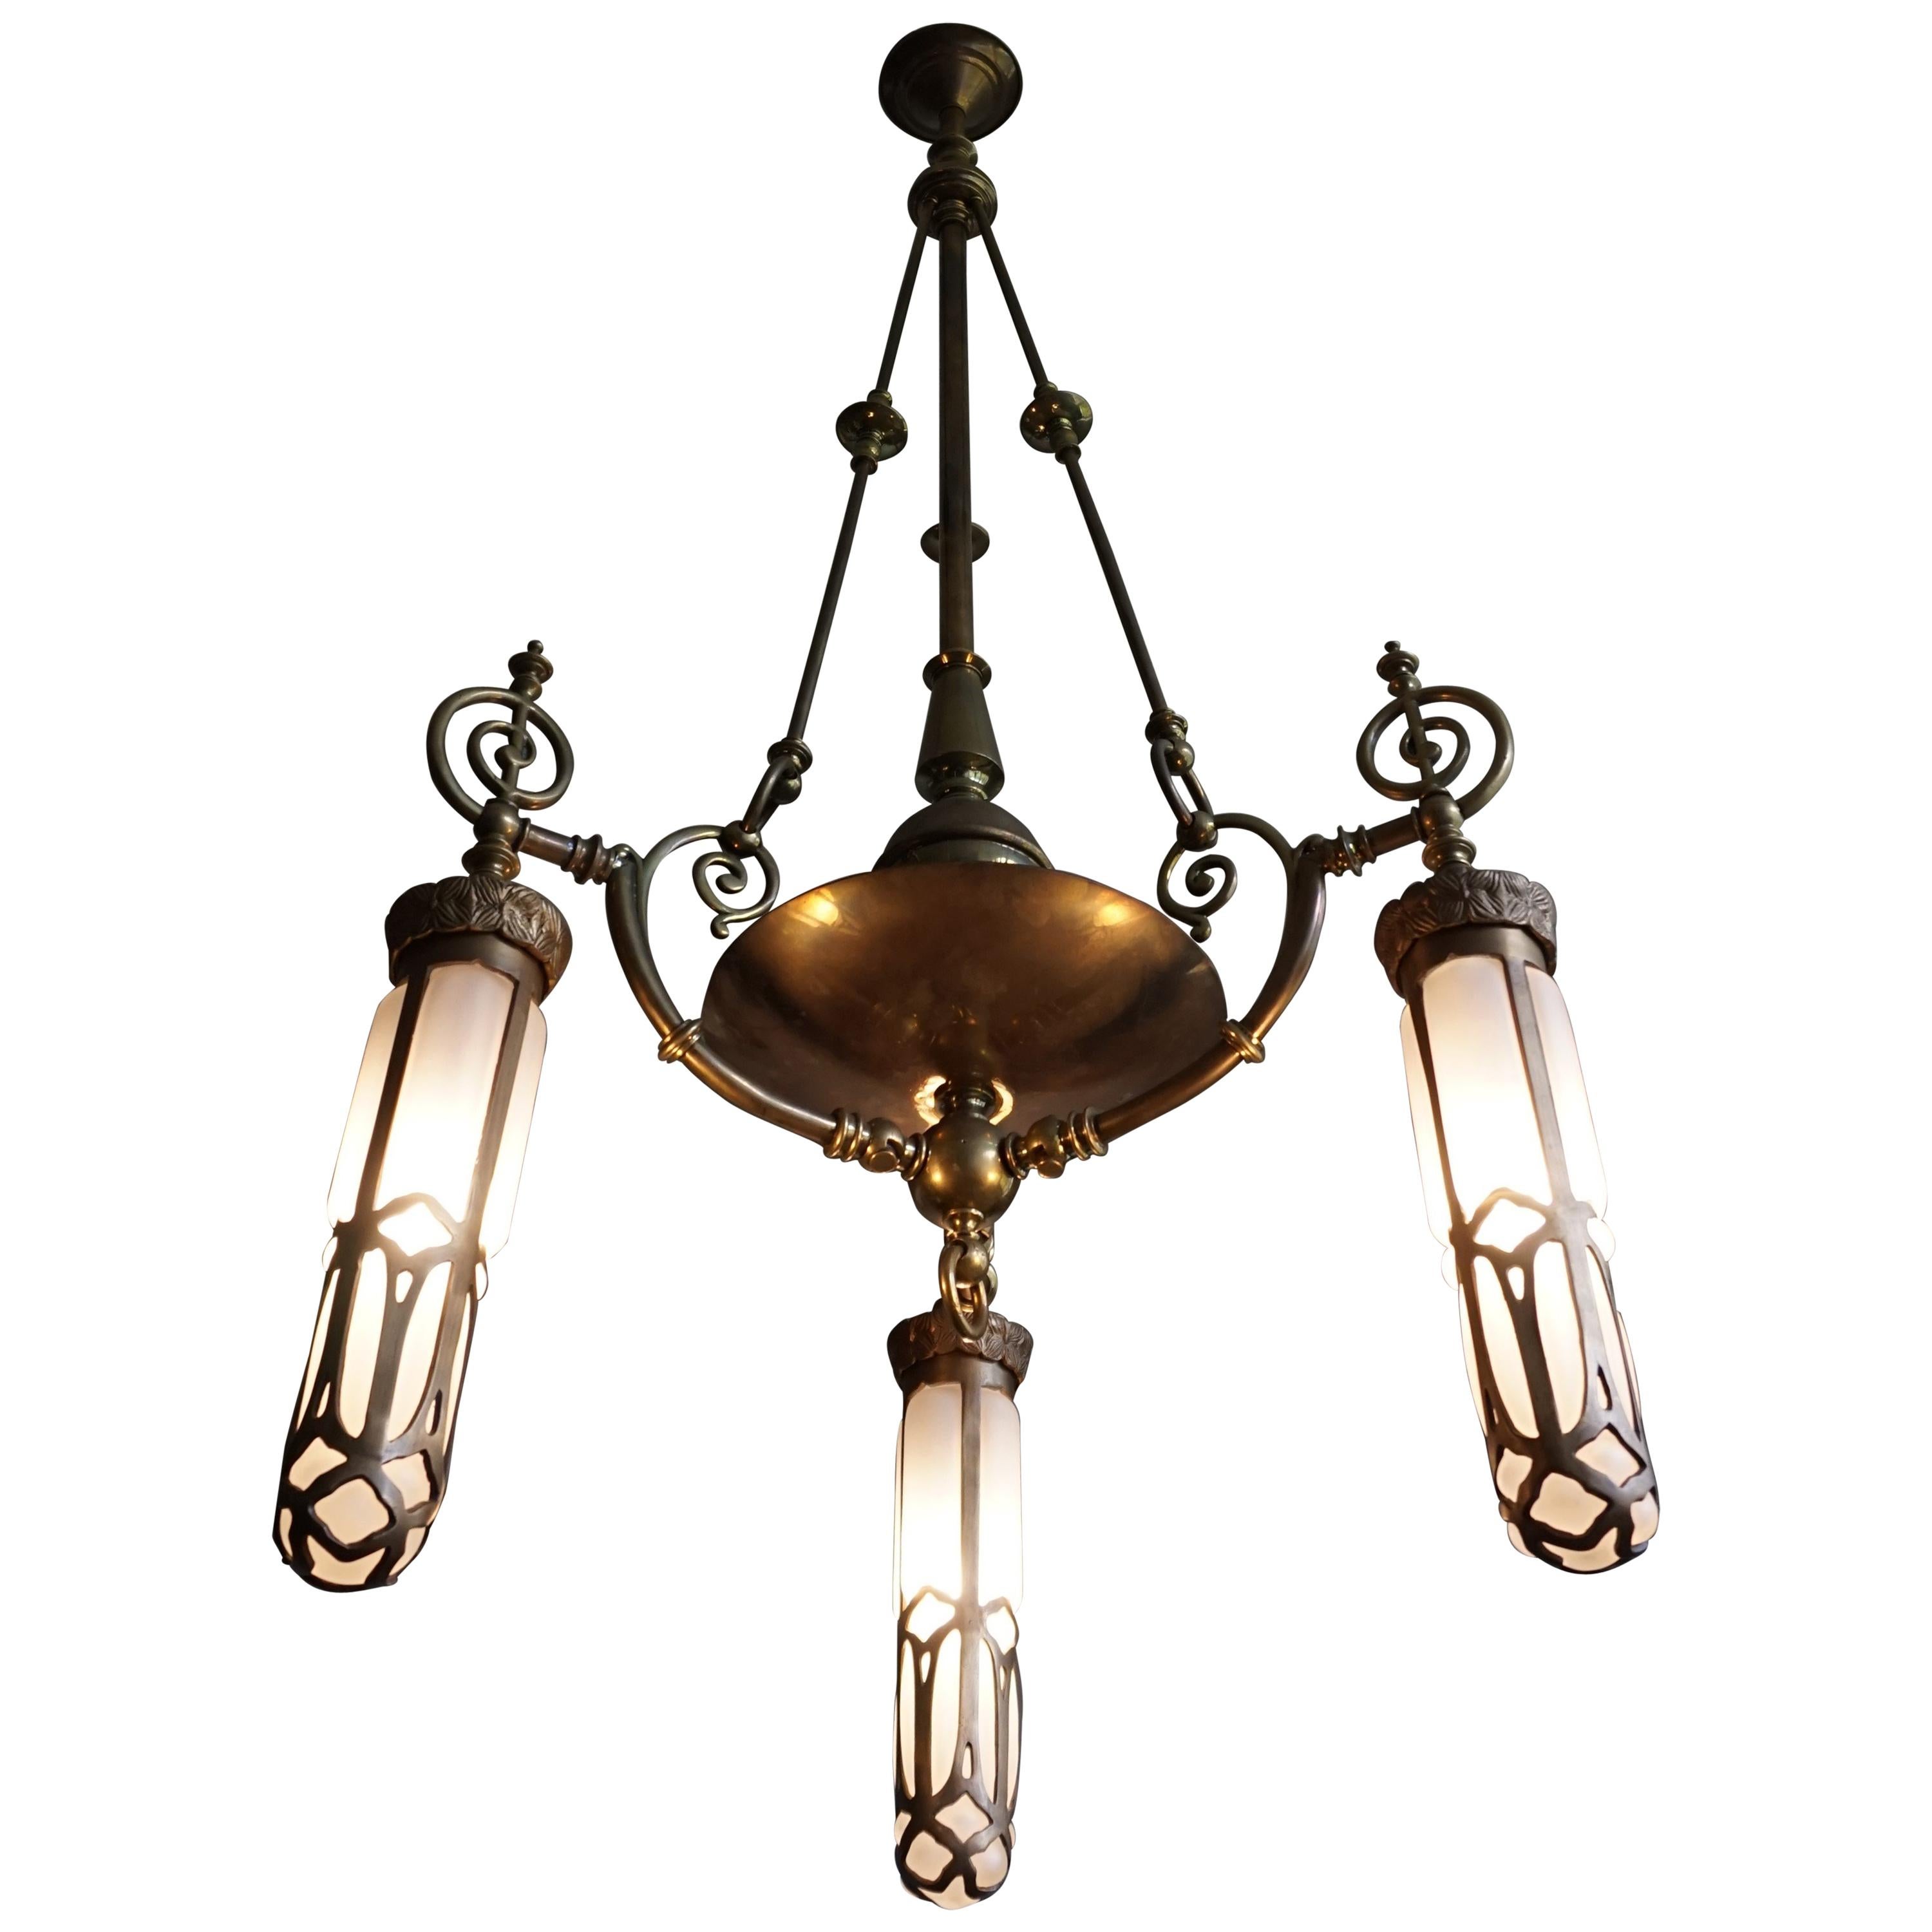 Late 1800s Arts & Crafts Brass Light Fixture with Later Bronze and Glass Shades